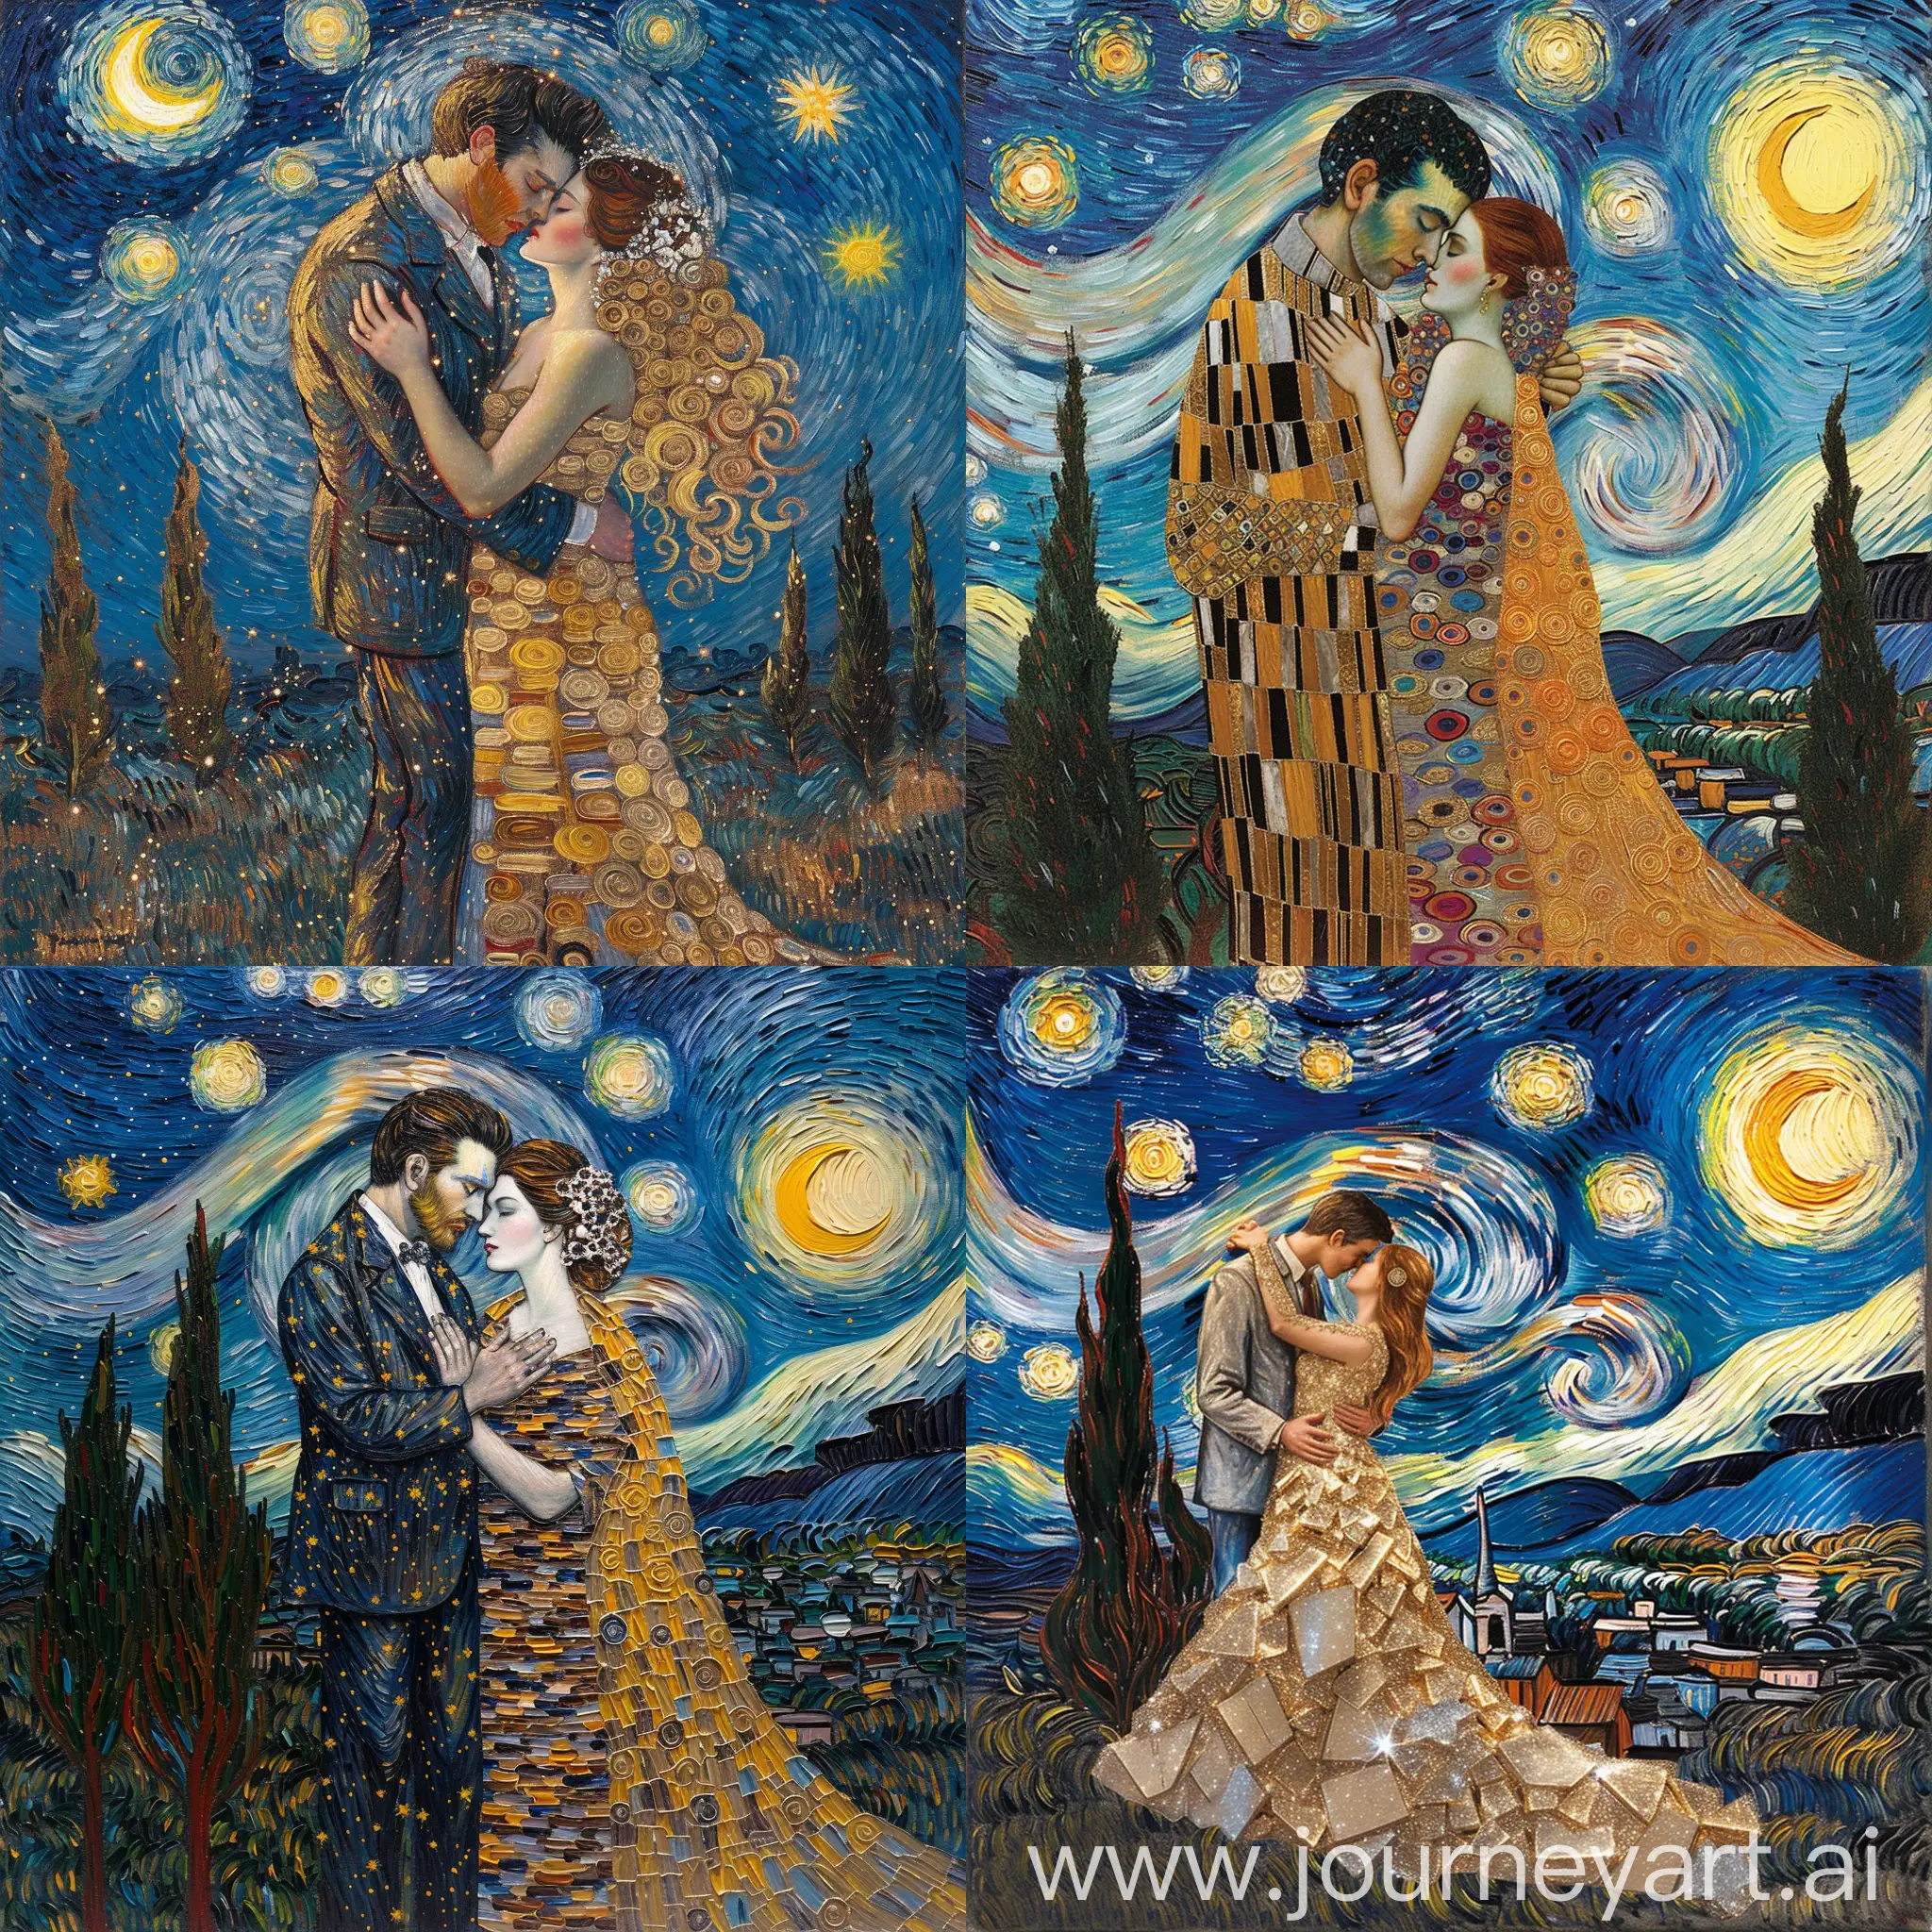 A breathtaking fusion of Vincent van Gogh's "The Starry Night" and Gustav Klimt's "The Kiss," creating a mesmerizing portrait of passion and the cosmos. The central figures from "The Kiss" are locked in a tender embrace, their bodies entwined and adorned with the distinctive geometric patterns and golden hues of Klimt's iconic style.

However, the couple is not set against a plain background, but rather immersed in the swirling, dreamlike landscape of "The Starry Night." The night sky comes alive with Van Gogh's signature brushstrokes, as whirling clouds, radiant stars, and a luminous crescent moon dance around the lovers.

The vibrant blues and yellows of the sky seem to melt into the rich, shimmering golds and warm tones of the couple's embrace, creating a harmonious interplay of color and emotion. The cypresses from "The Starry Night" wind their way through the composition, their sinuous forms echoing the curves of the lovers' bodies.

The couple's faces are obscured, as in "The Kiss," adding to the sense of universality and timelessness. The man's face is replaced by a constellation of stars, while the woman's visage is a shimmering supernova, suggesting that their love is as vast and eternal as the cosmos itself.

Brushstrokes vary throughout the piece, with Van Gogh's thick, expressive impasto lending energy and movement to the sky, while Klimt's delicate, precise lines define the figures and their patterned robes. The overall effect is a painting that pulses with life, passion, and the sense of being caught up in something greater than oneself.

--ar 1:1 --stylize 1000 --q 2 --c 25 --s 5000

